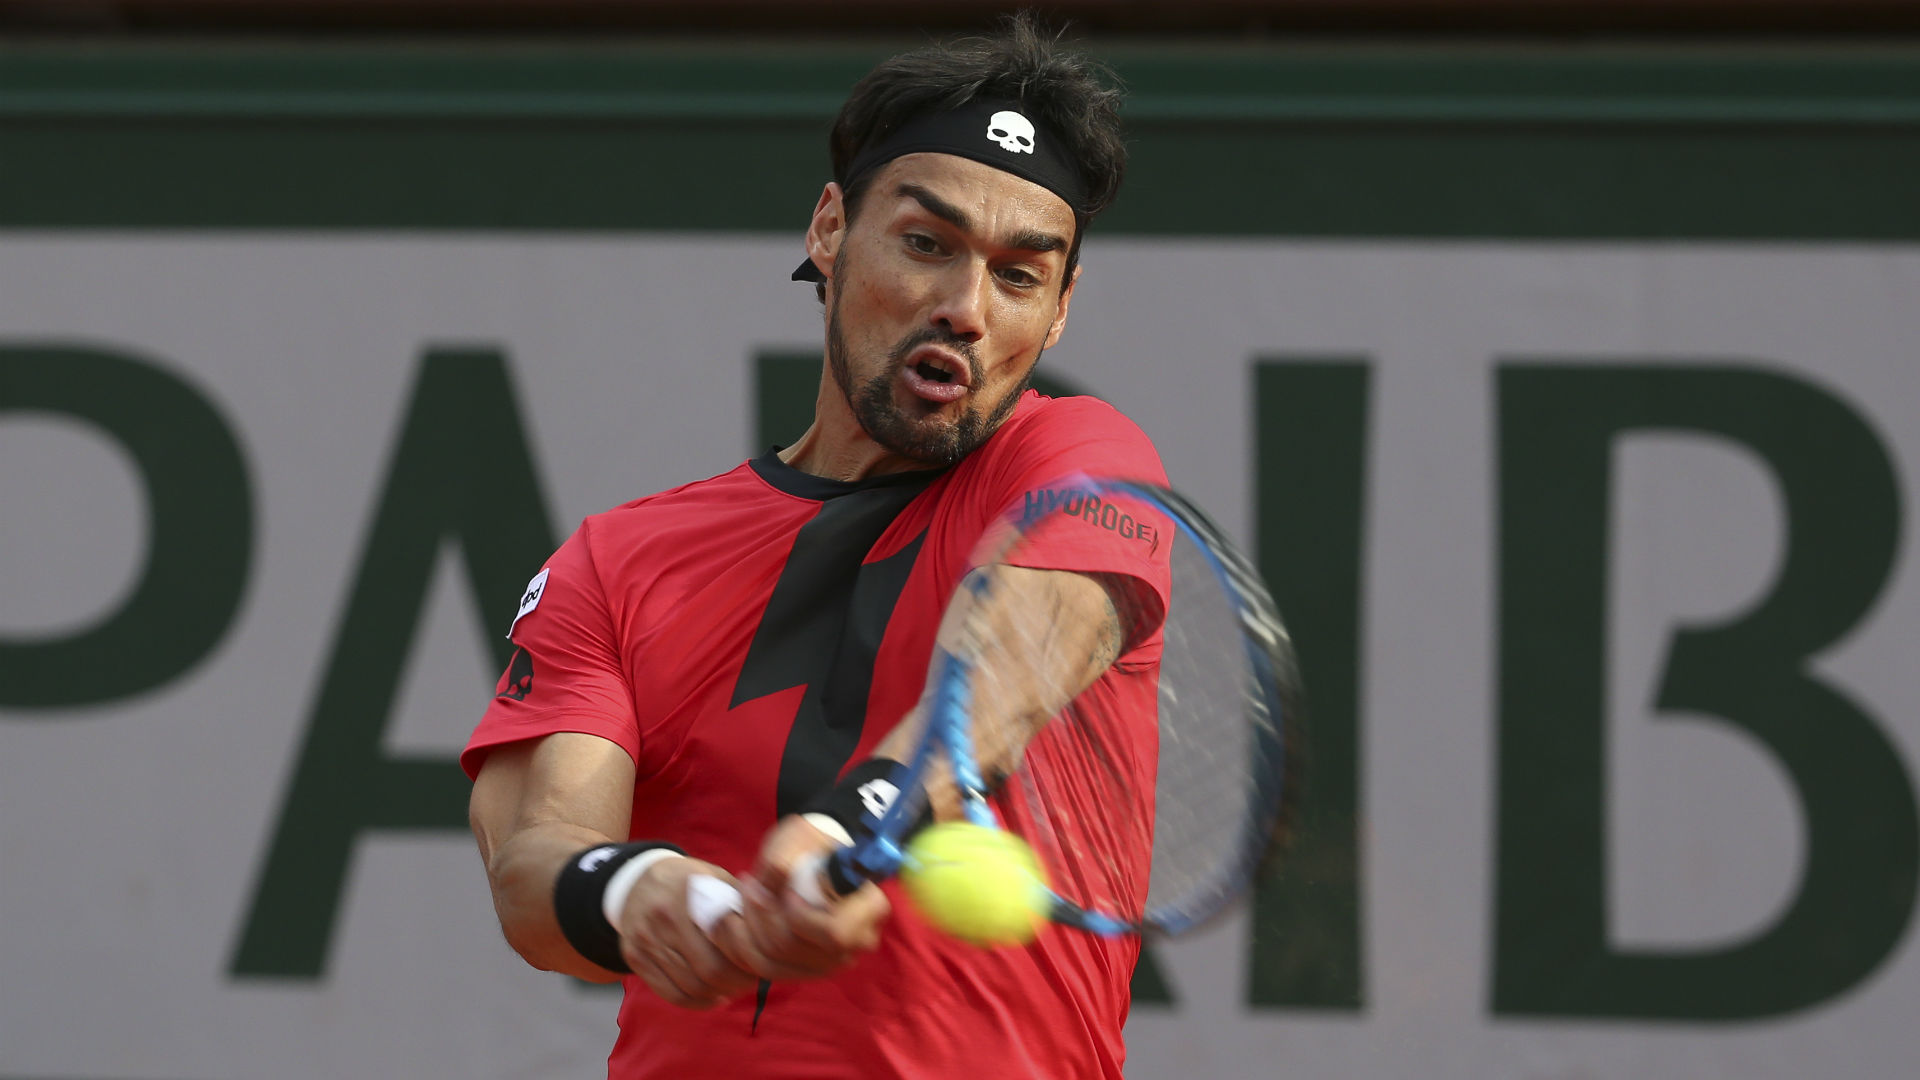 With the ATP Tour season still suspended and Fabio Fognini struggling with persistent ankle problems, the Italian has opted for surgery.